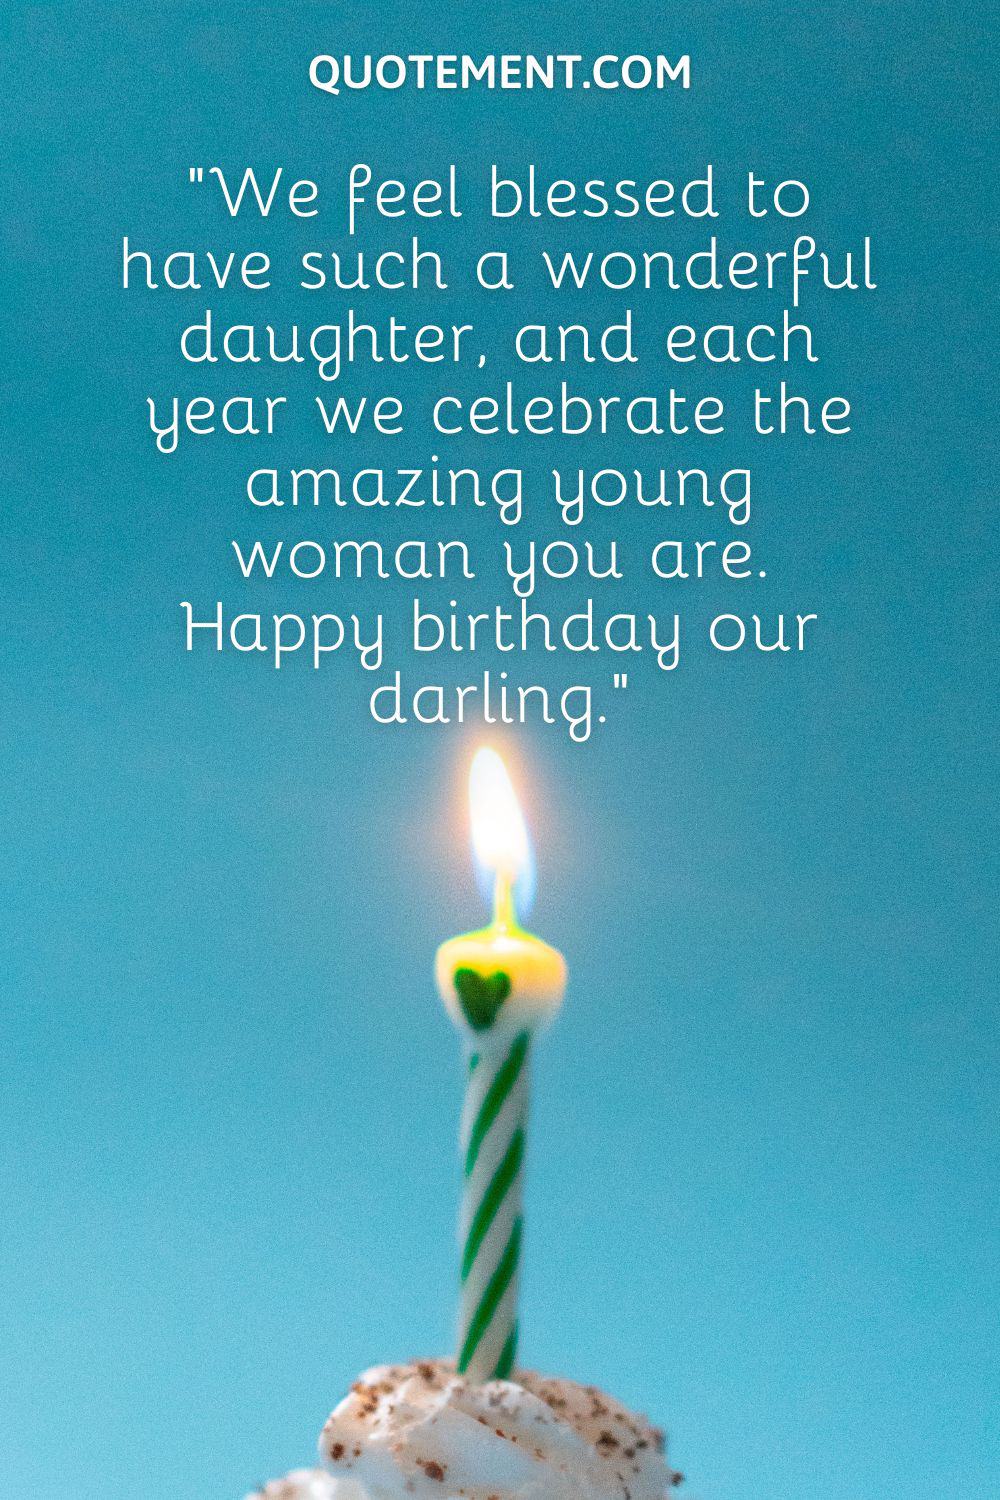 “We feel blessed to have such a wonderful daughter, and each year we celebrate the amazing young woman you are. Happy birthday our darling.”